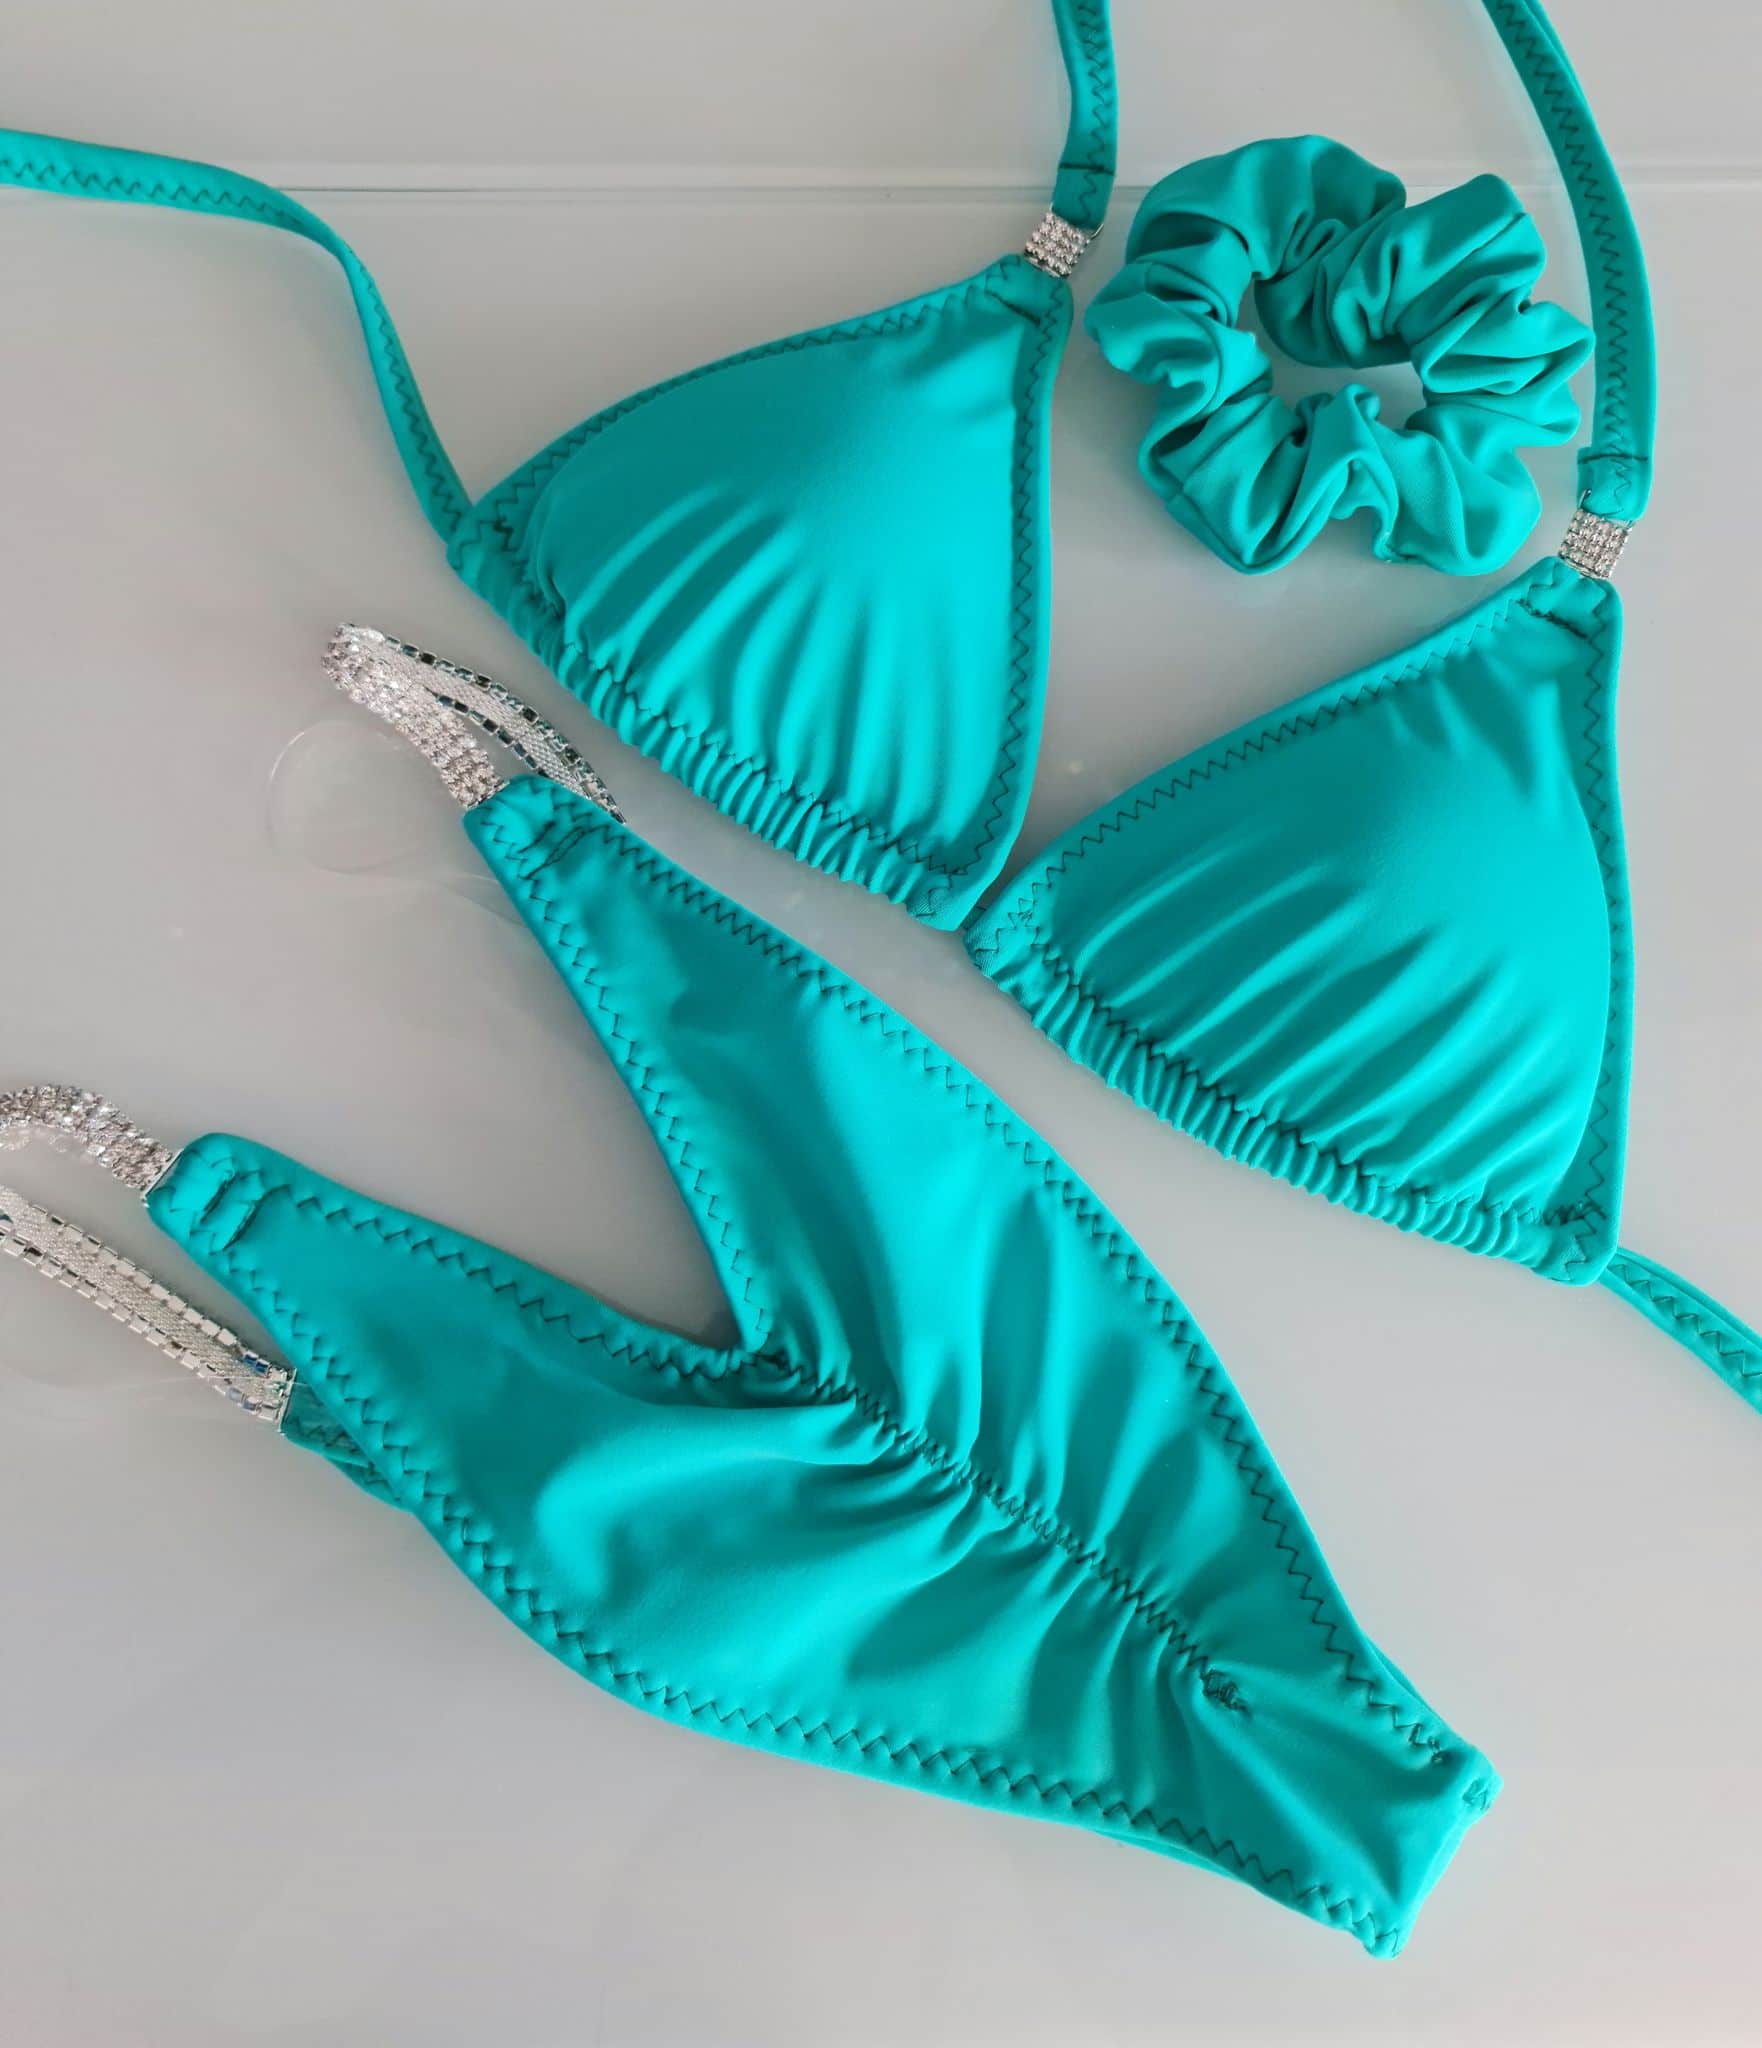 Tiffany Blue Posing Suit with connectors on bottoms - Miss Bikini Fitness